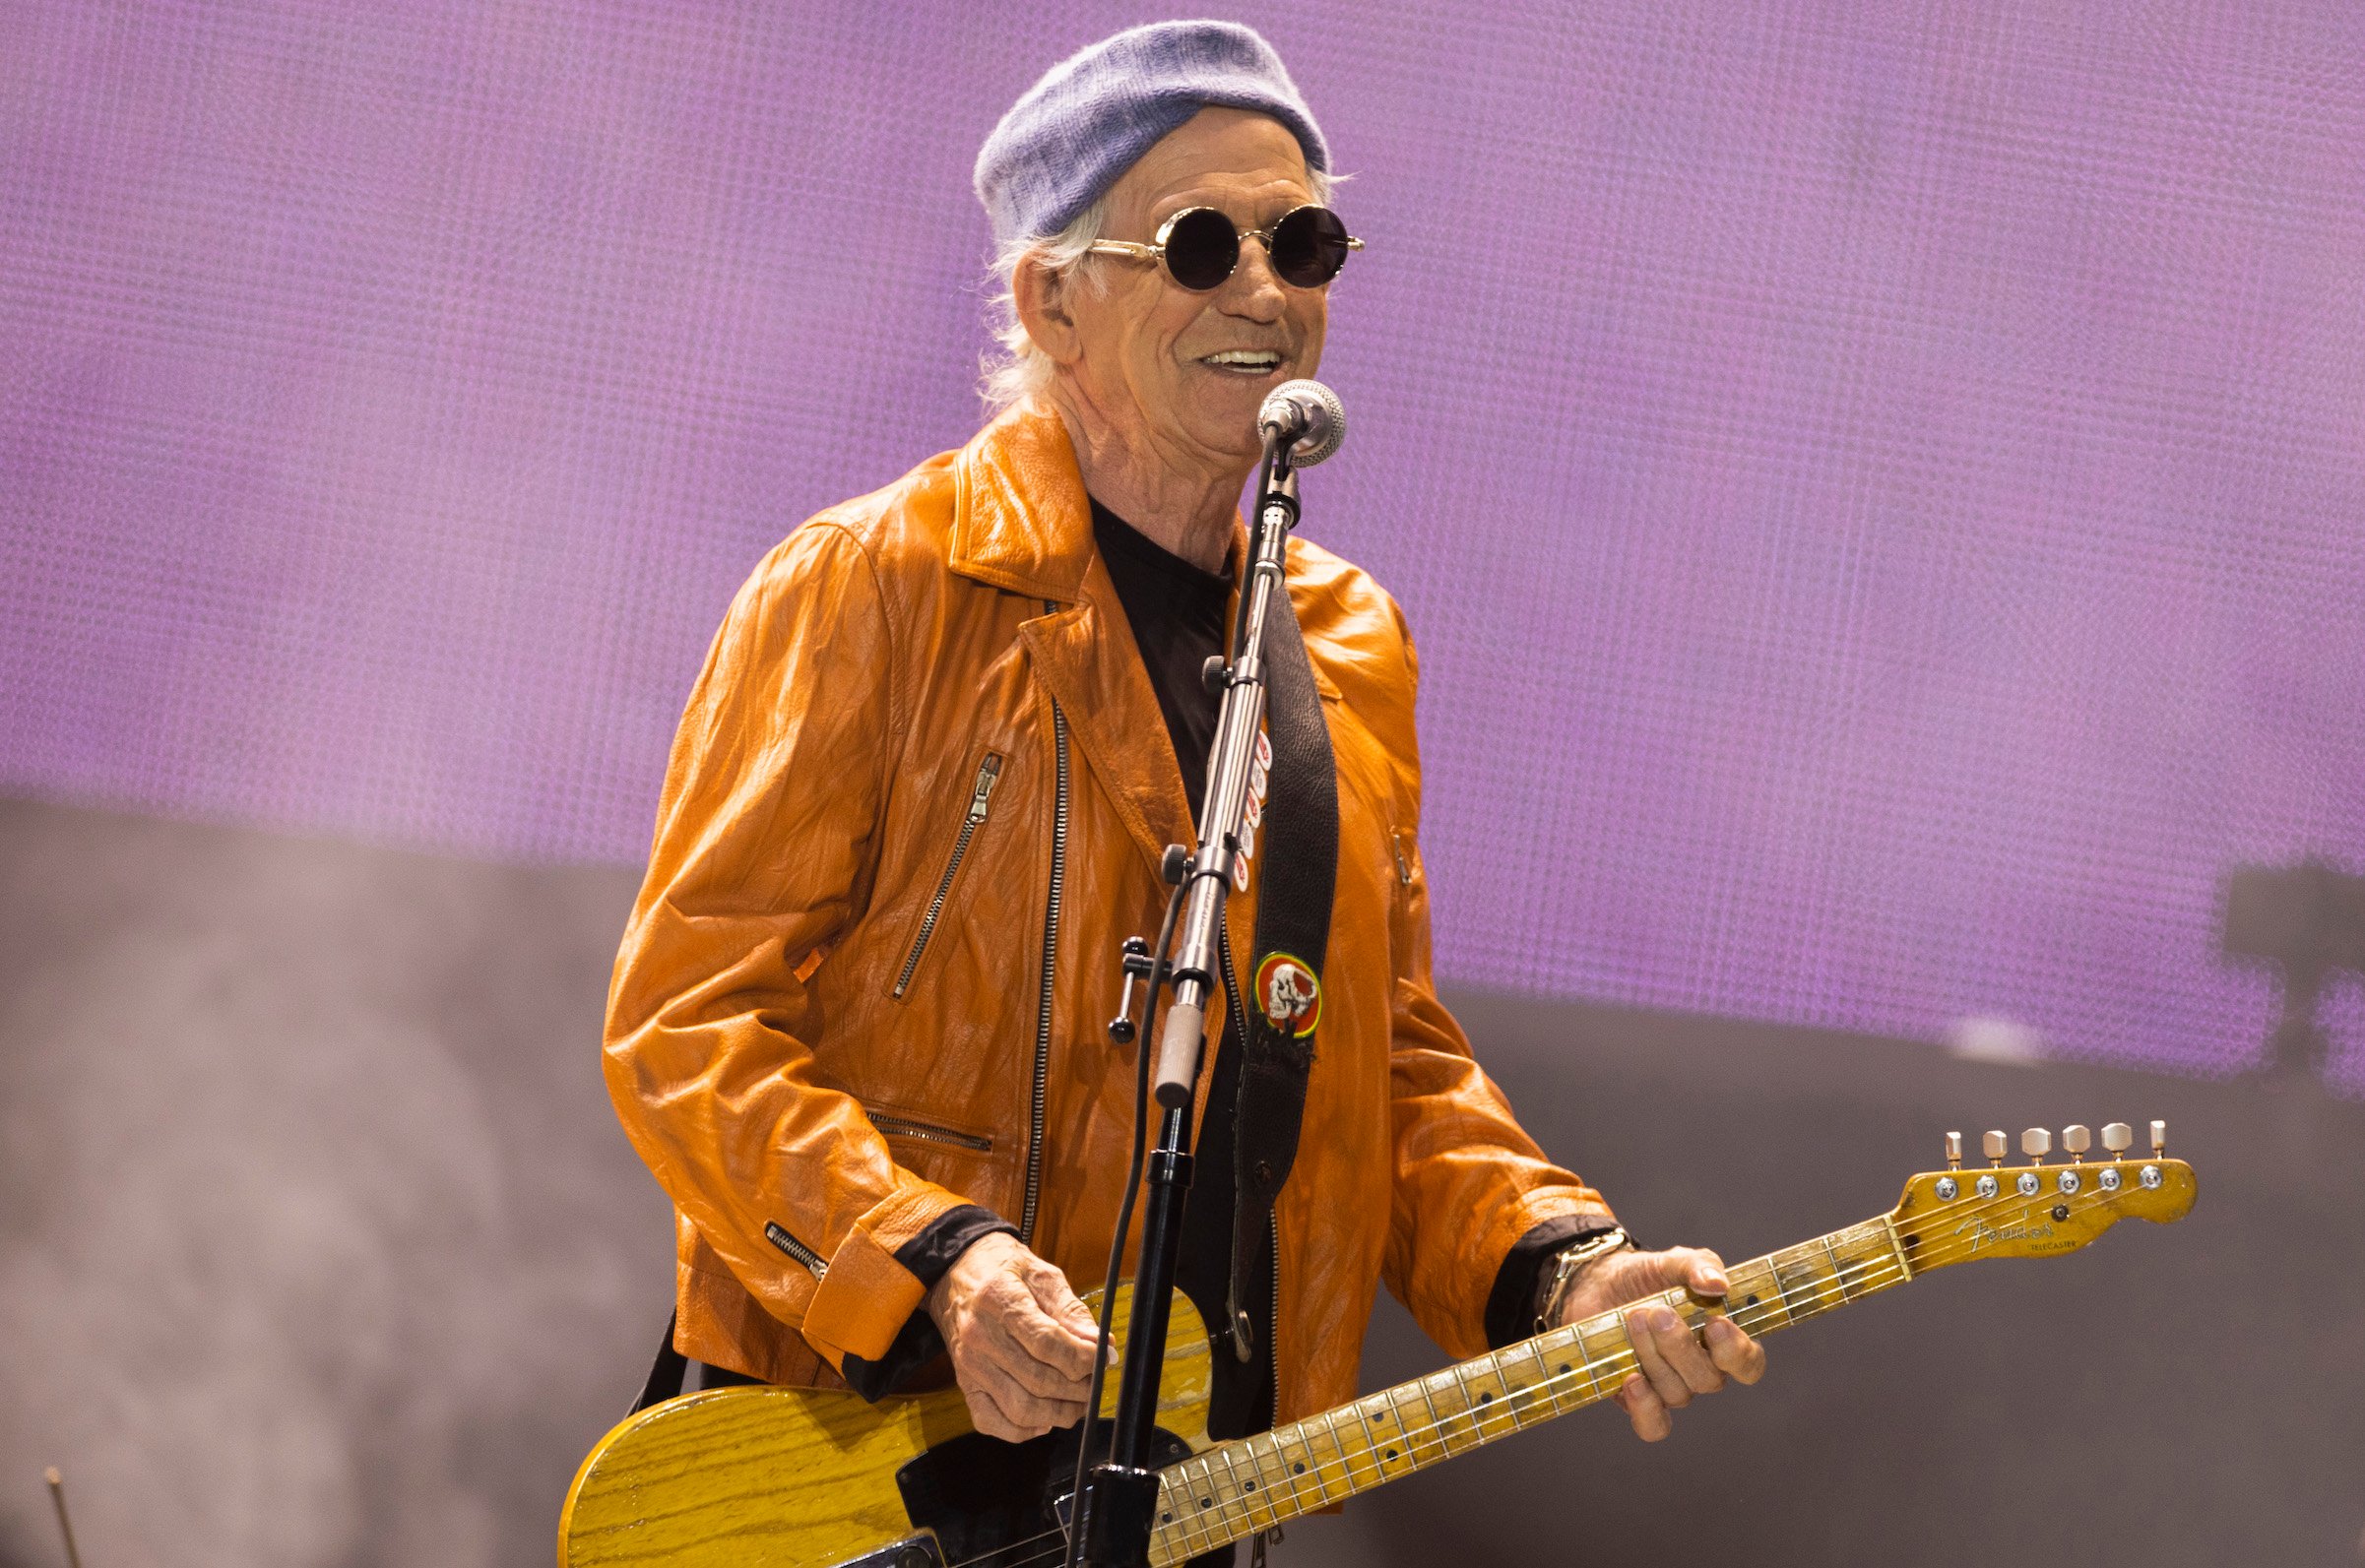 Keith Richards performs with The Rolling Stones in Amsterdam, Netherlands